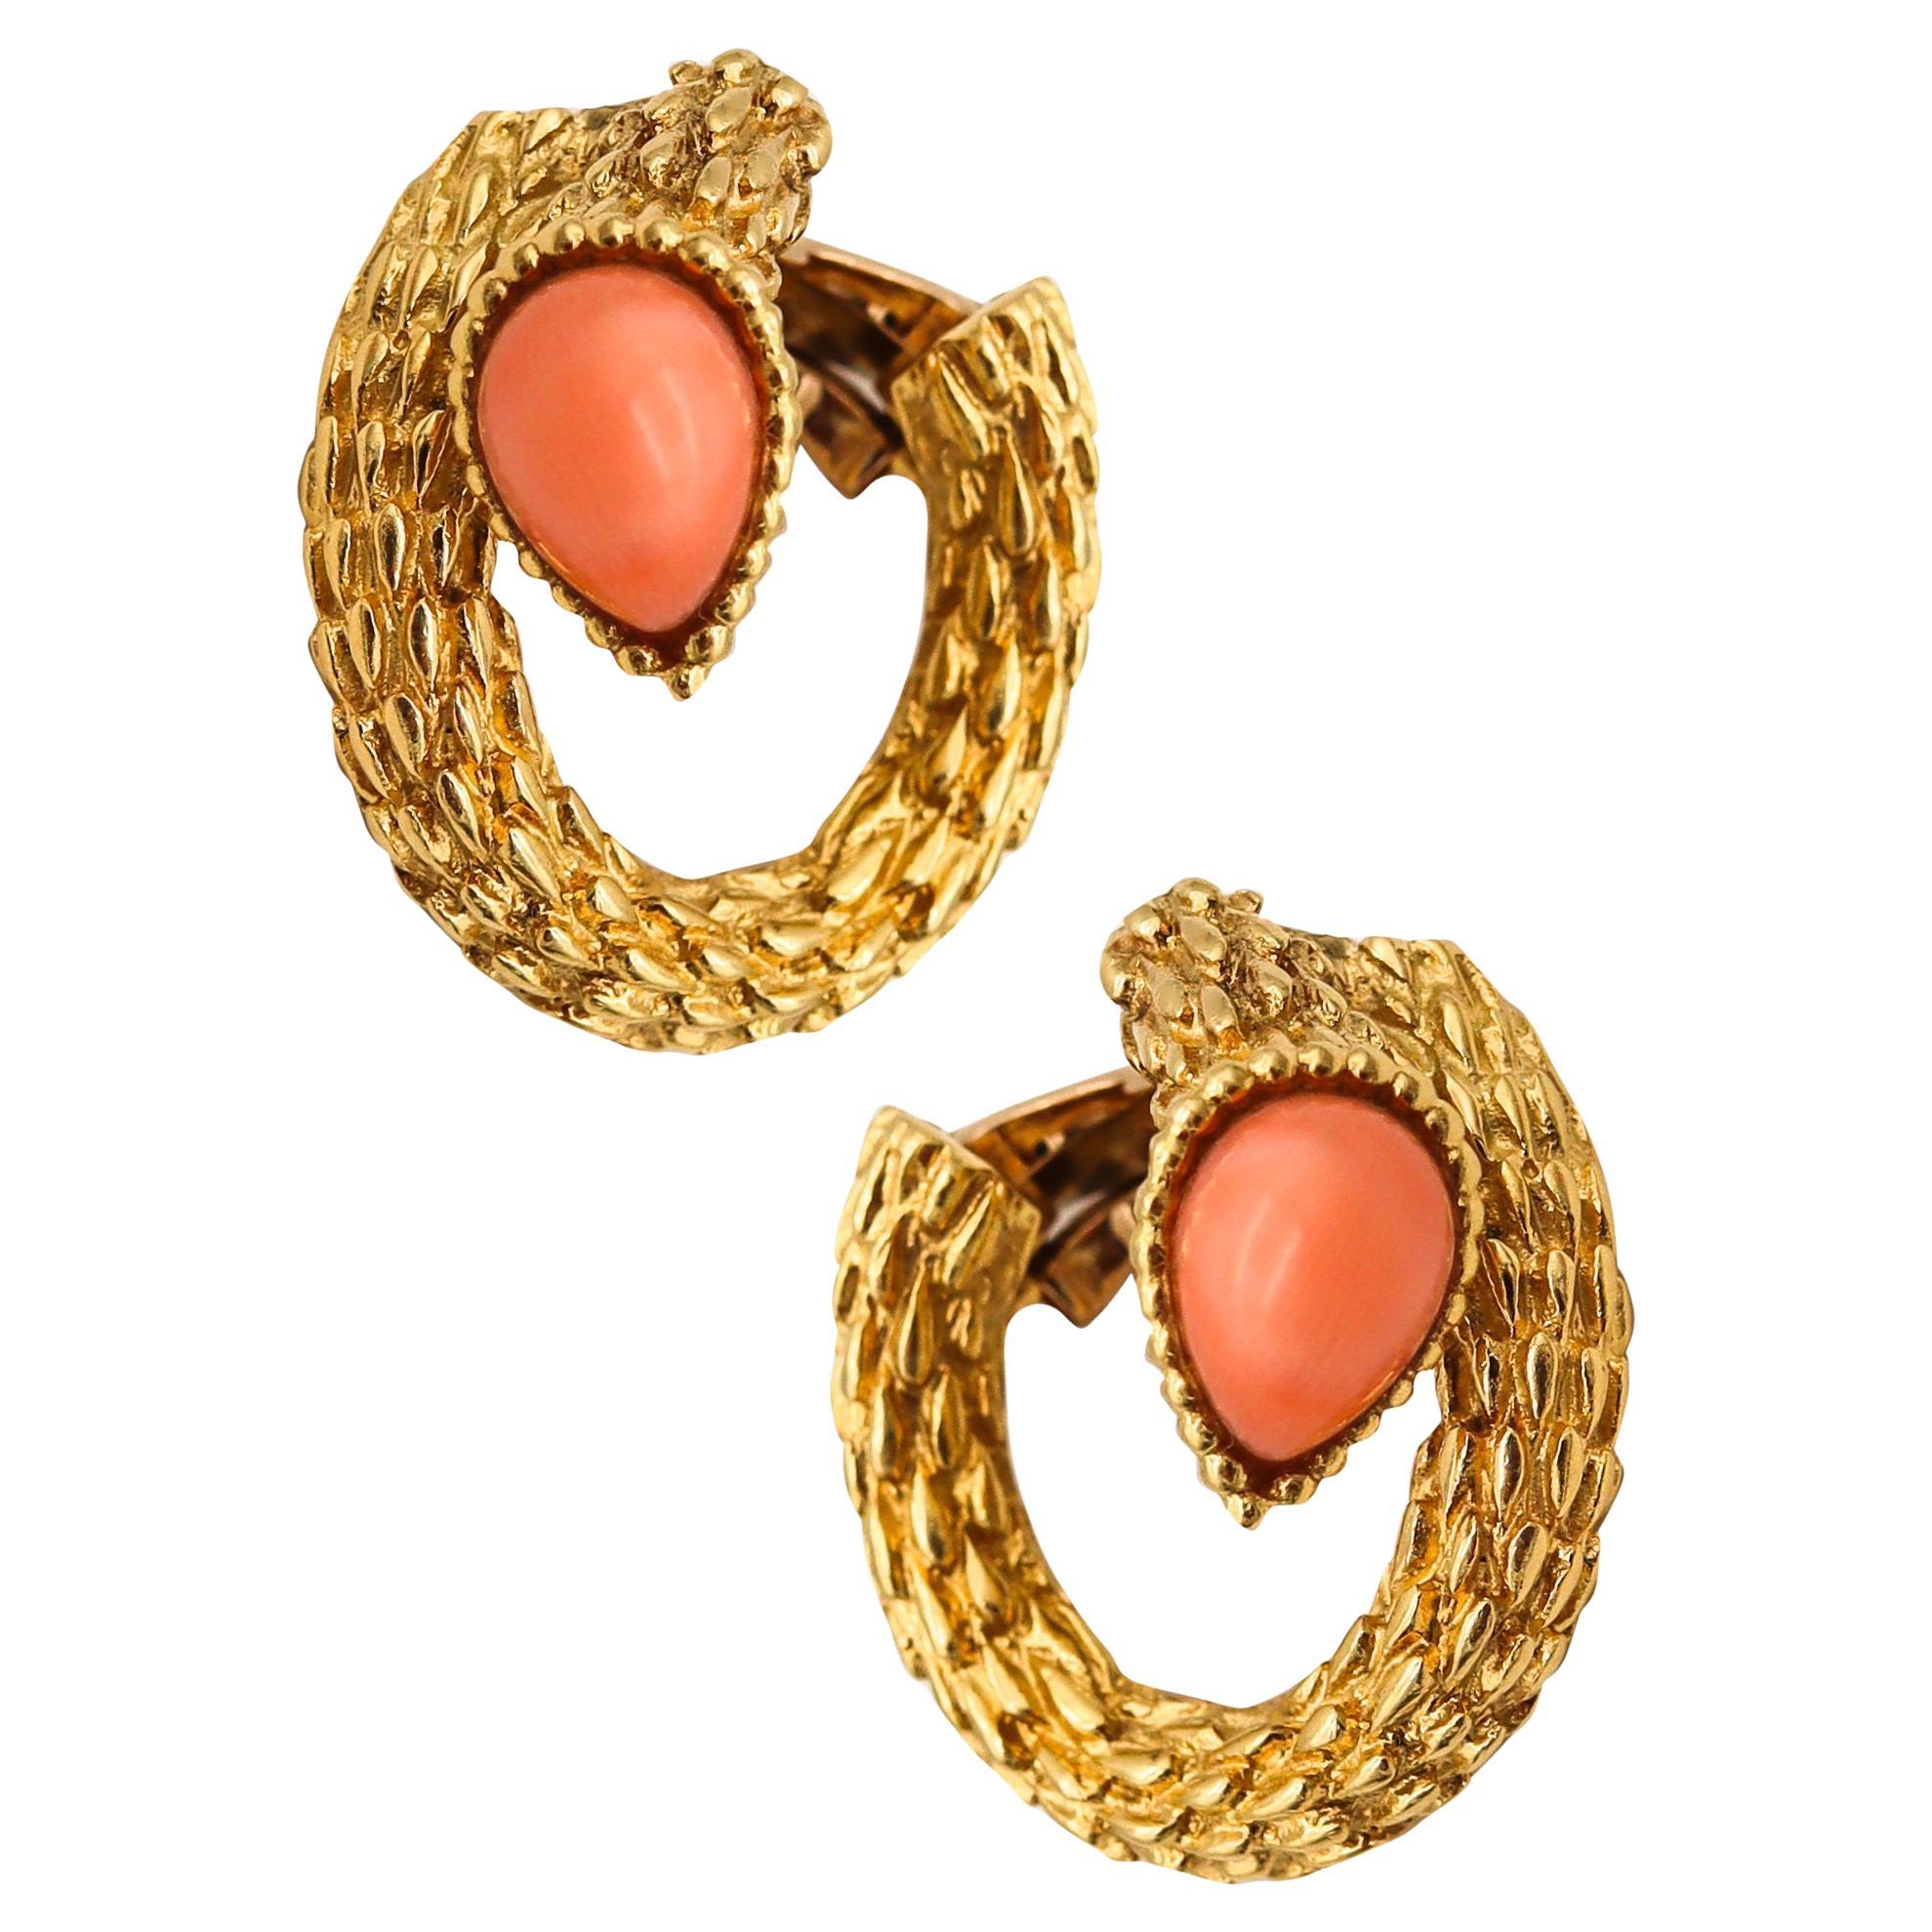 Boucheron Paris 1970 Serpent Boheme Textured Earrings In 18Kt Gold With Coral